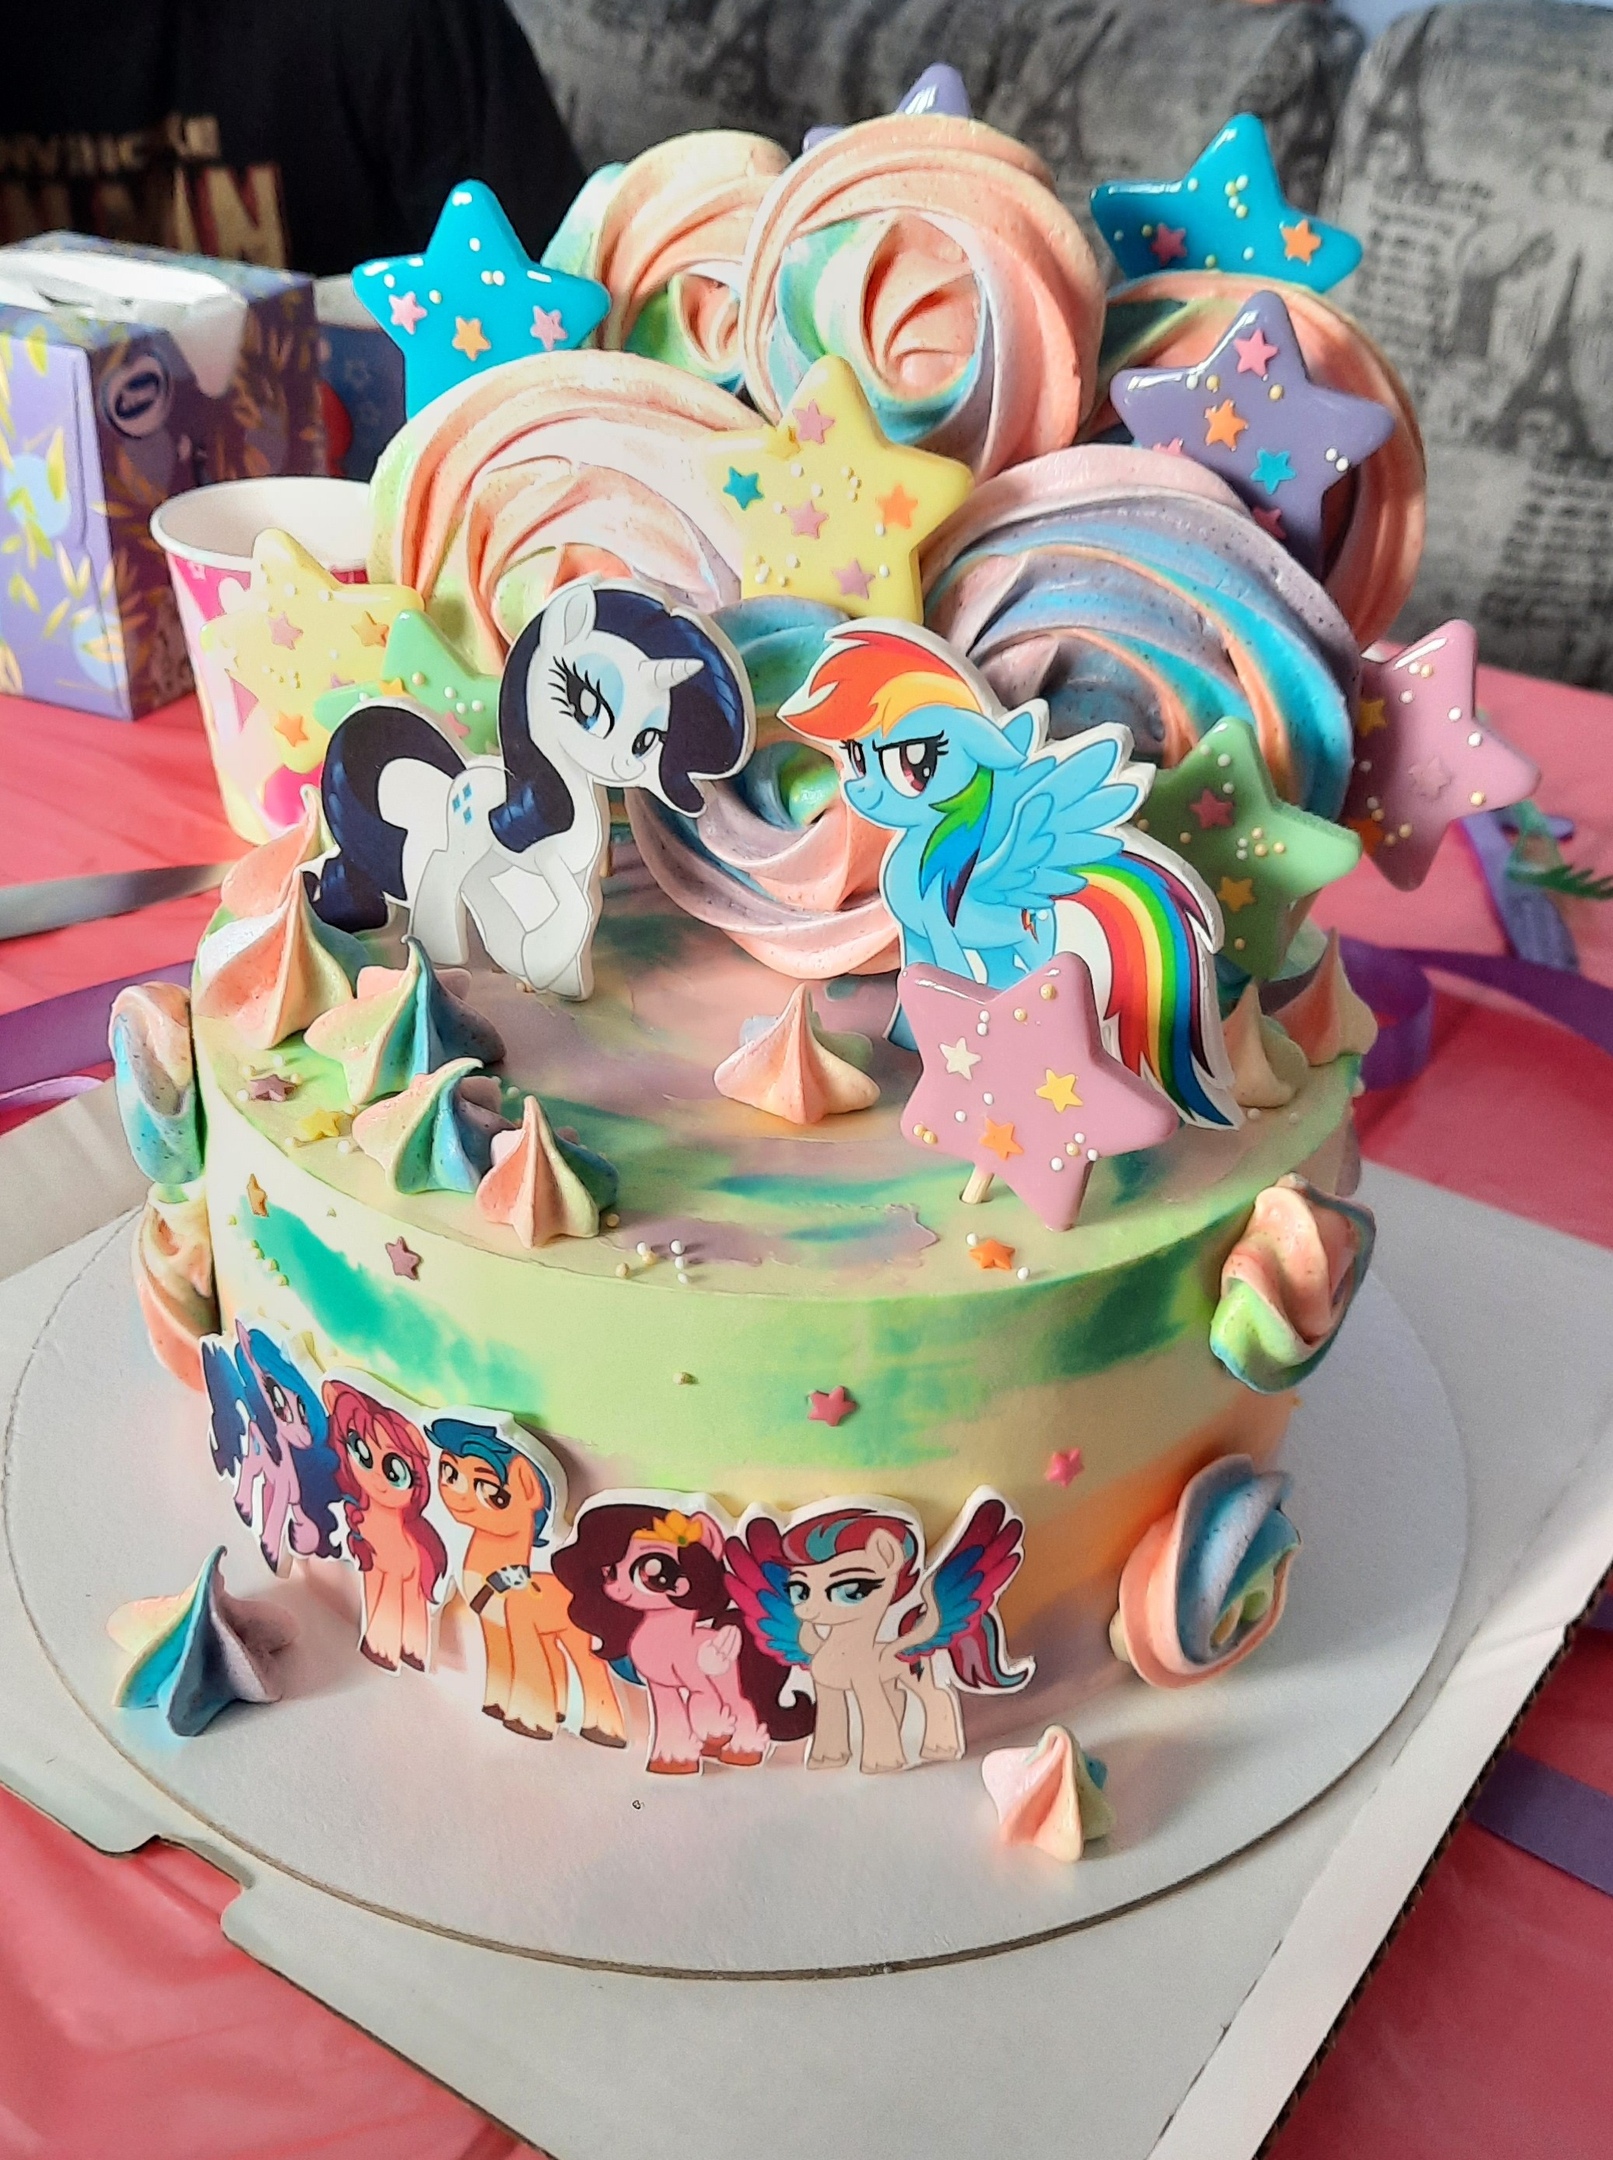 Amazon.com: DecoPac My Little Pony Cake Topper, 3-Piece Cake Decorations  with Rainbow Dash and Twilight Sparkle Ponies for Fun After the Birthday  Party, 3